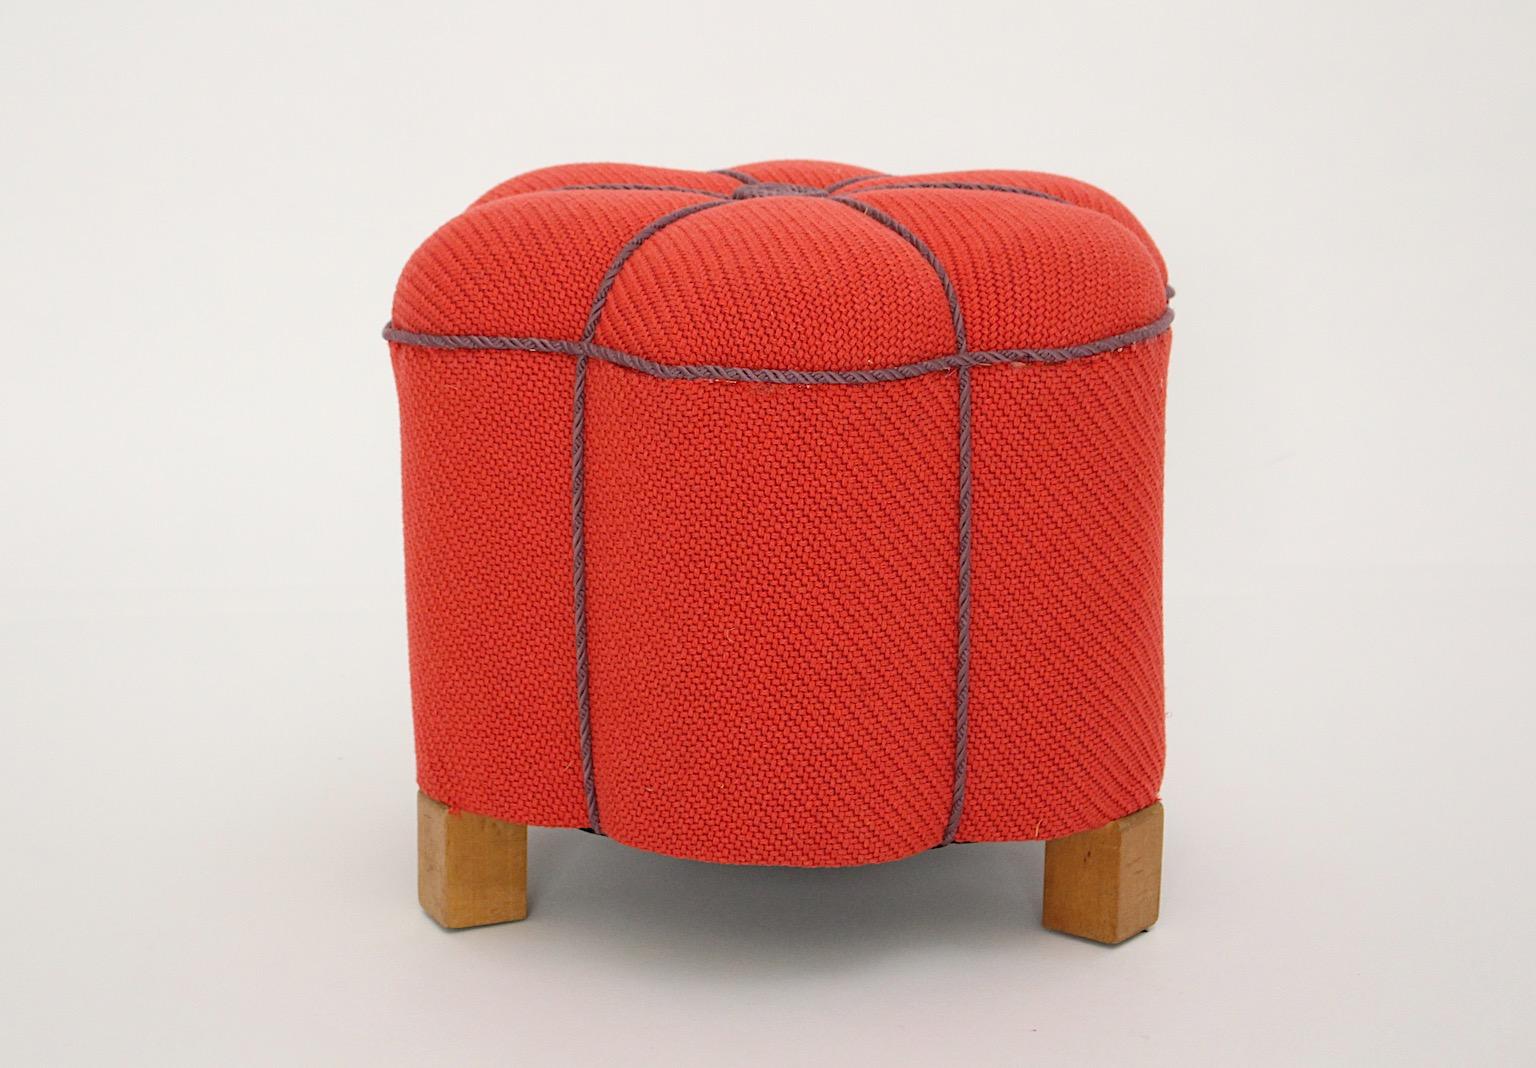 Art Deco vintage stool ottoman pouf from red coral fabric and lavender cords designed and manufactured Austria 1930s.
A high quality textured textil fabric shows a red lipstick like color and the lavender cords feature elegant style and vibe.